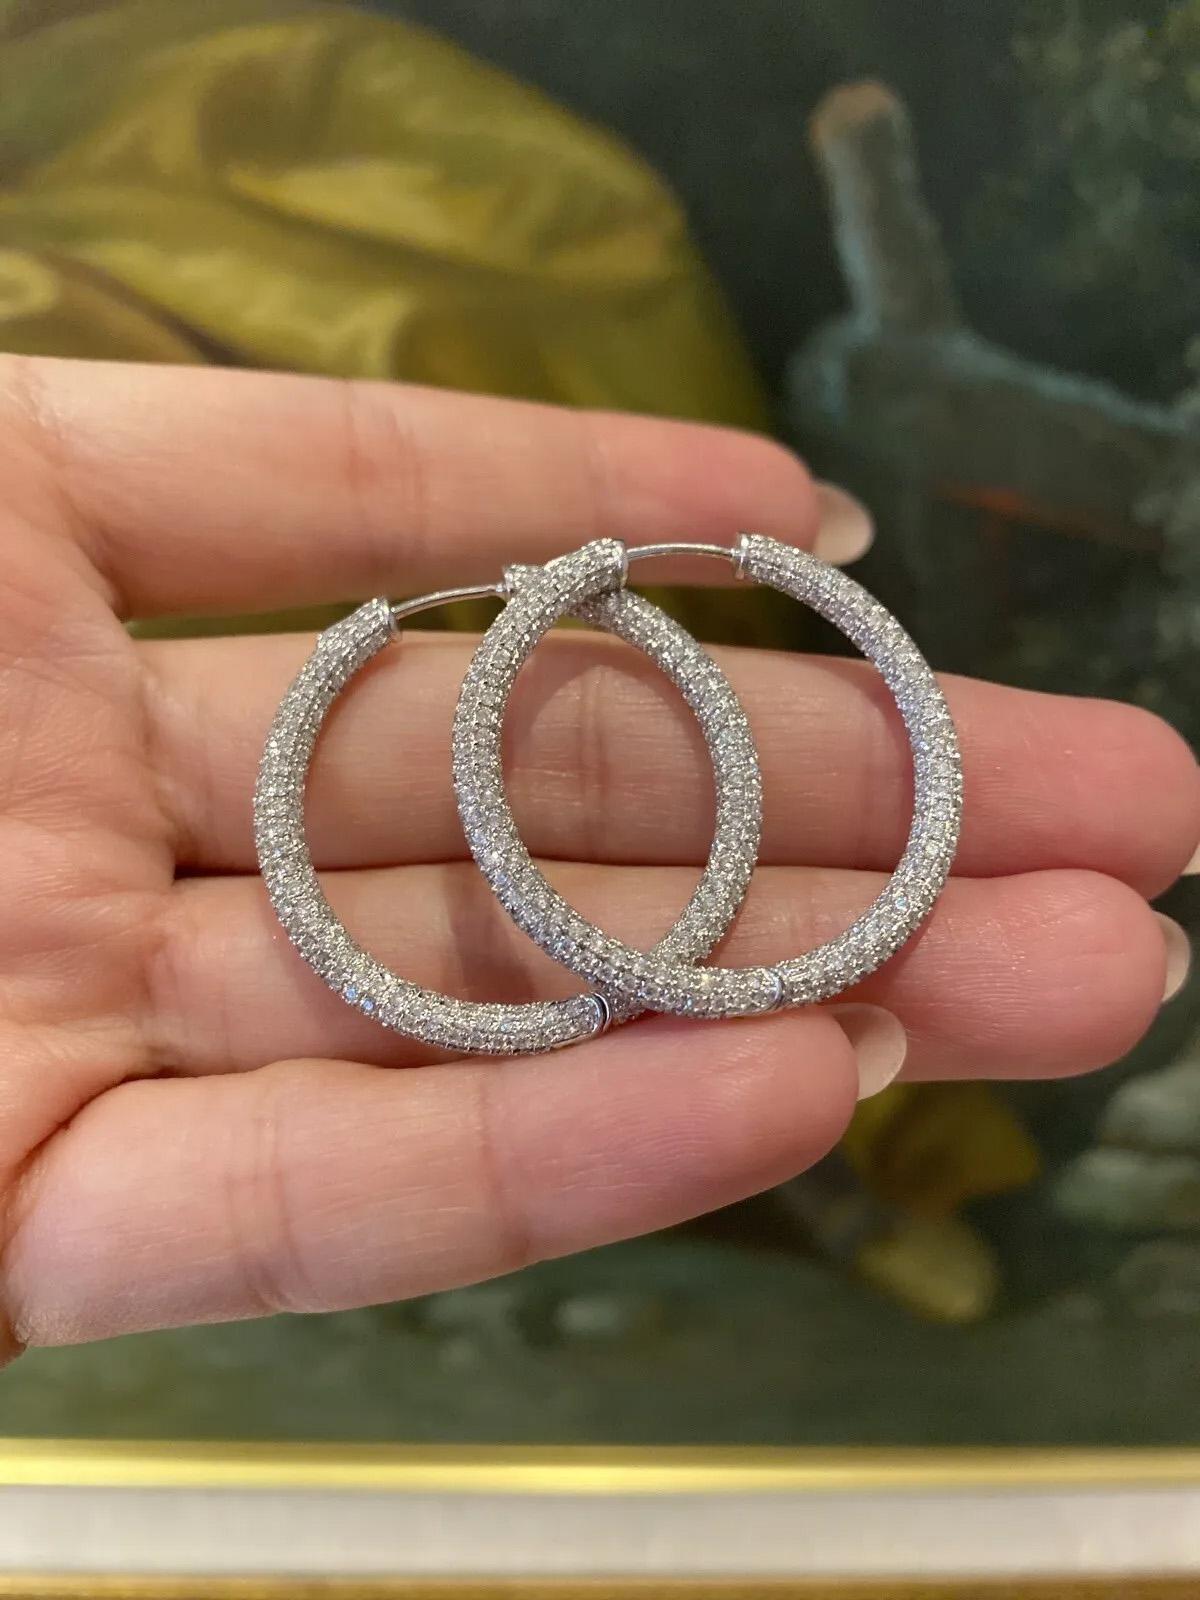 5.04 Carats Round Pavé Diamond Hoop Earrings in 18k White Gold by Odelia In Excellent Condition For Sale In La Jolla, CA